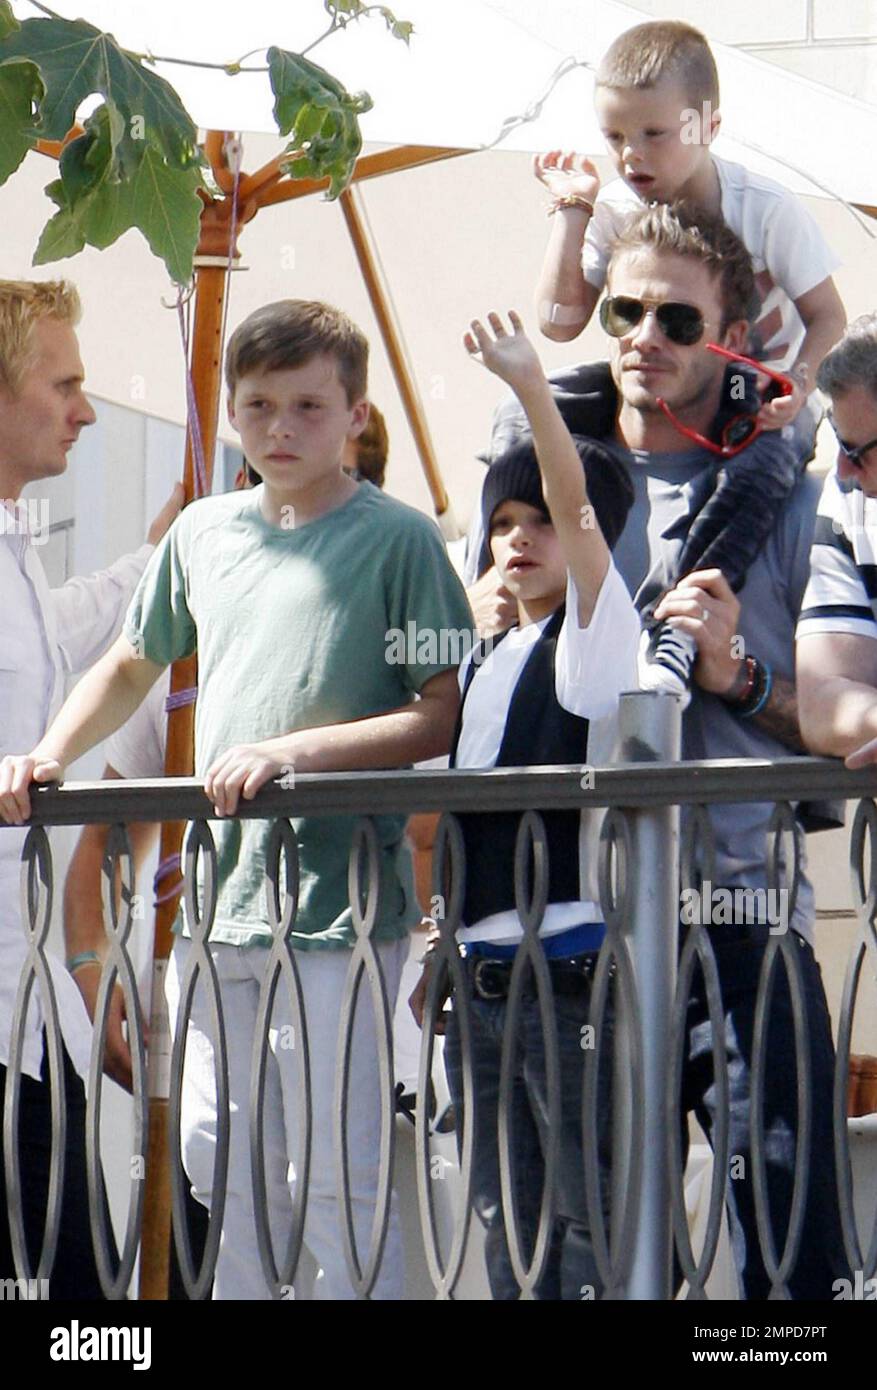 Footballer David Beckham, wife Victoria and their three sons Brooklyn, 11,  Romeo, 8, and Cruz, 5, watch a free Jonas Brothers concert from a balcony  at The Grove open-air shopping center. The